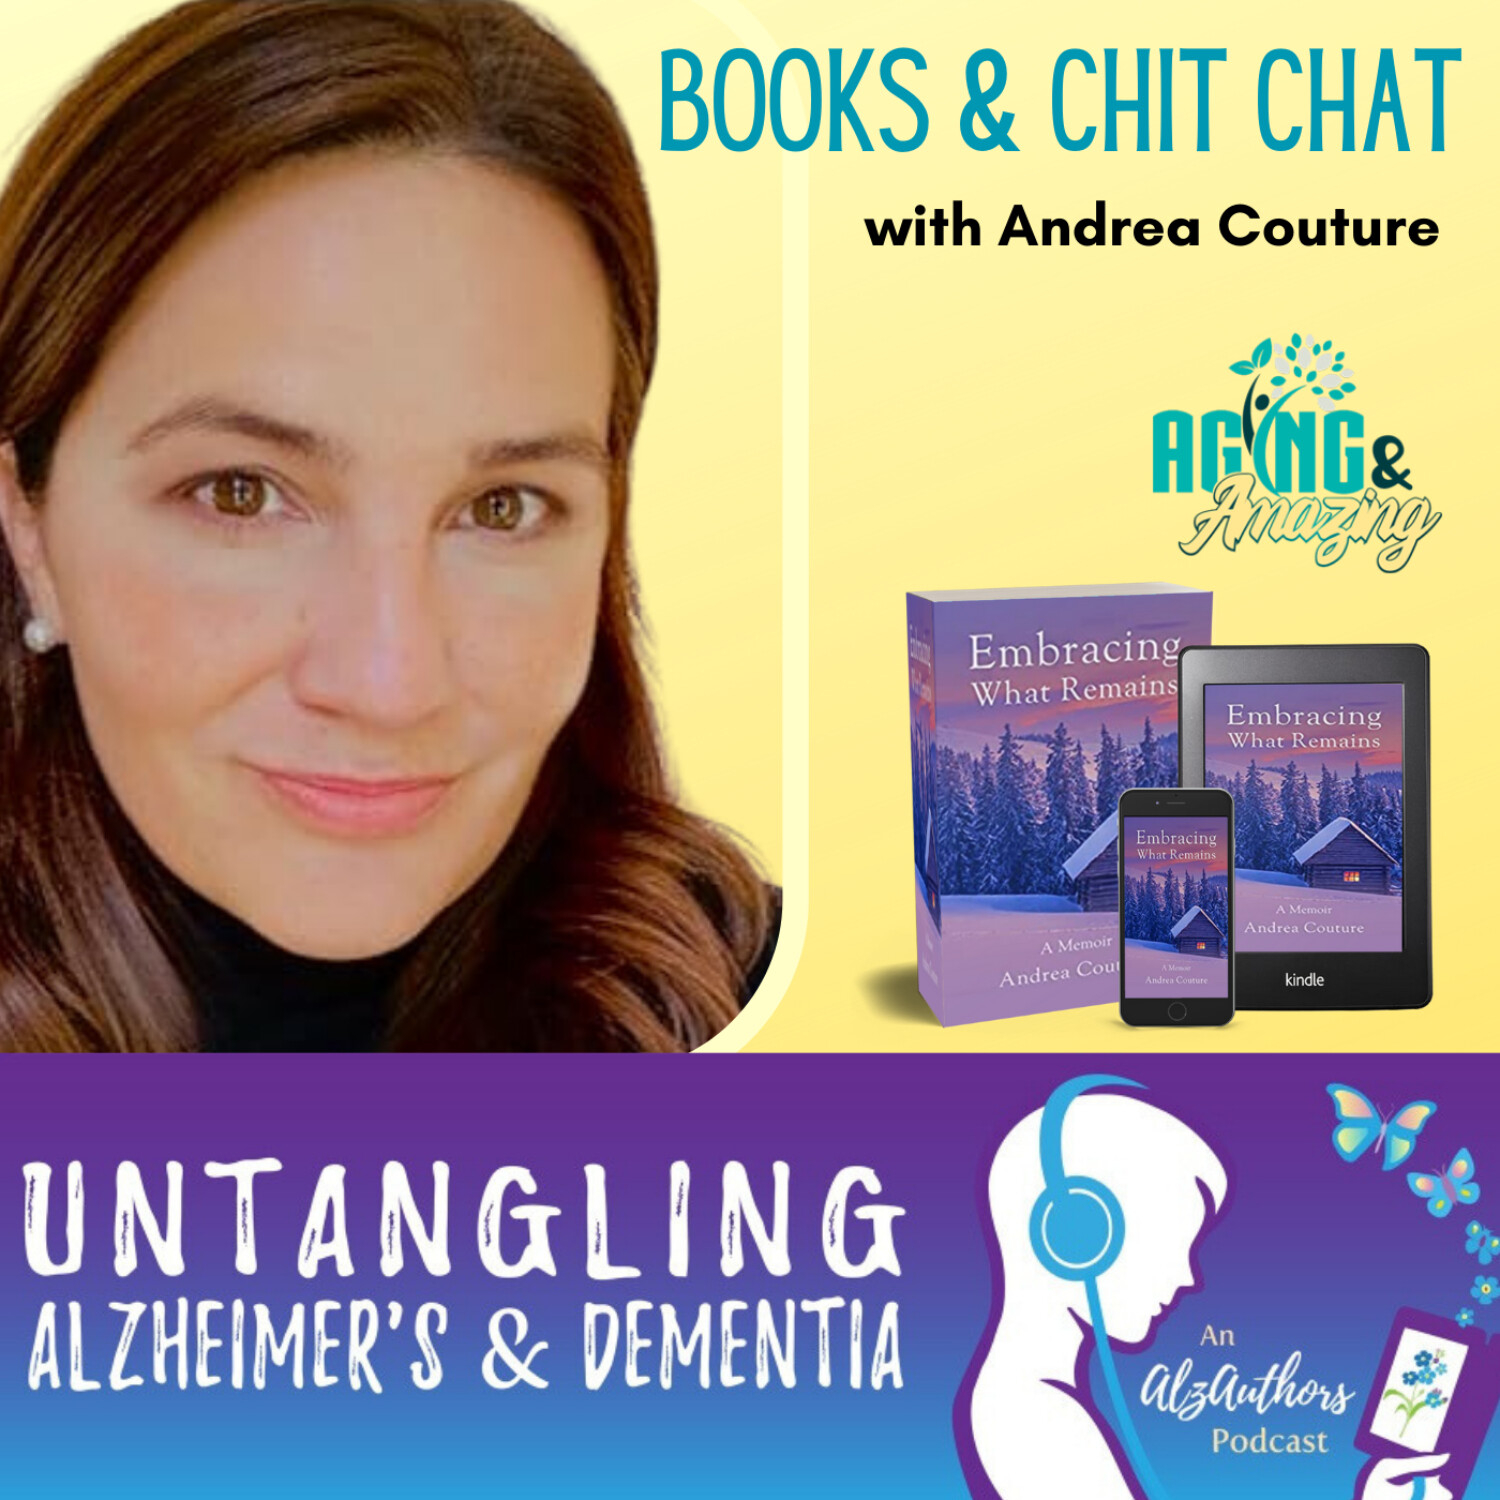 Books & Chit Chat: Andrea Couture Discusses Memoir “Embracing What Remains”